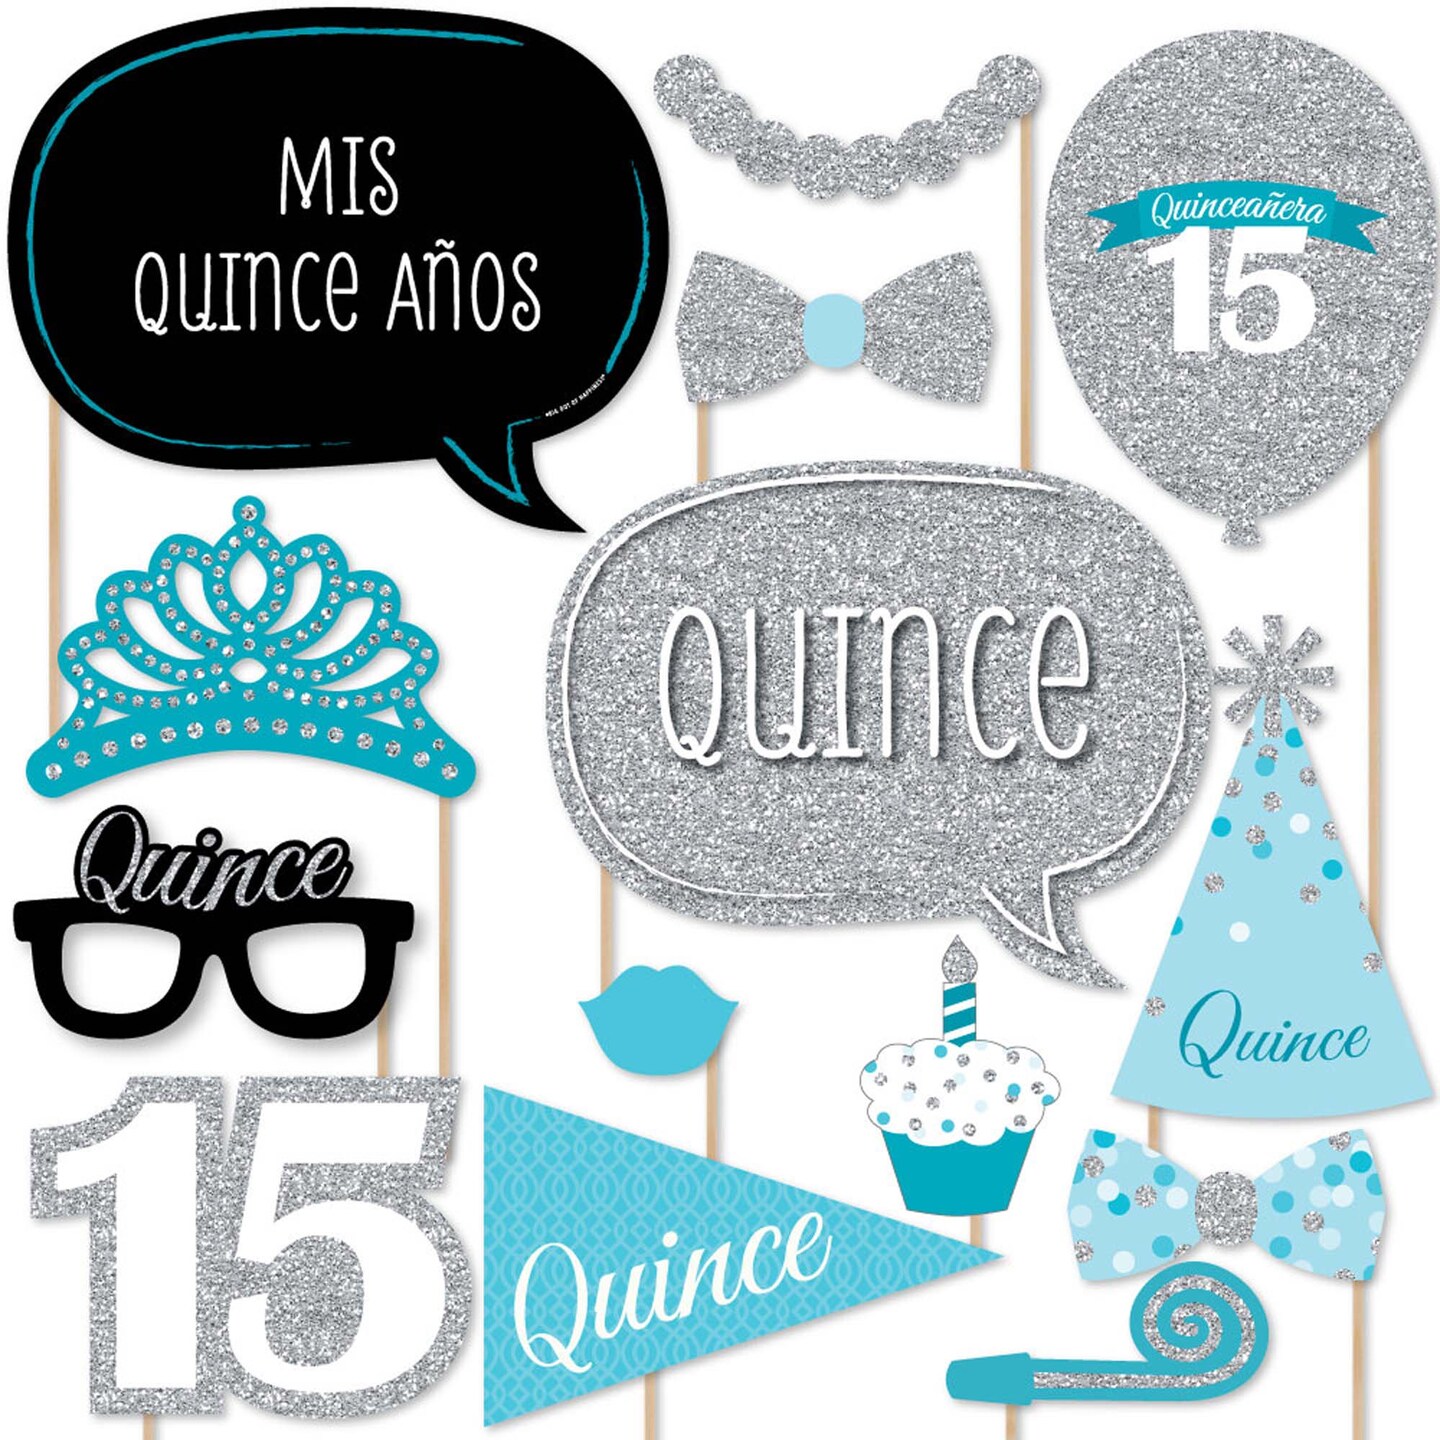 Big Dot of Happiness Quinceanera Teal - Sweet 15 - Birthday Party Photo Booth Props Kit - 20 Count